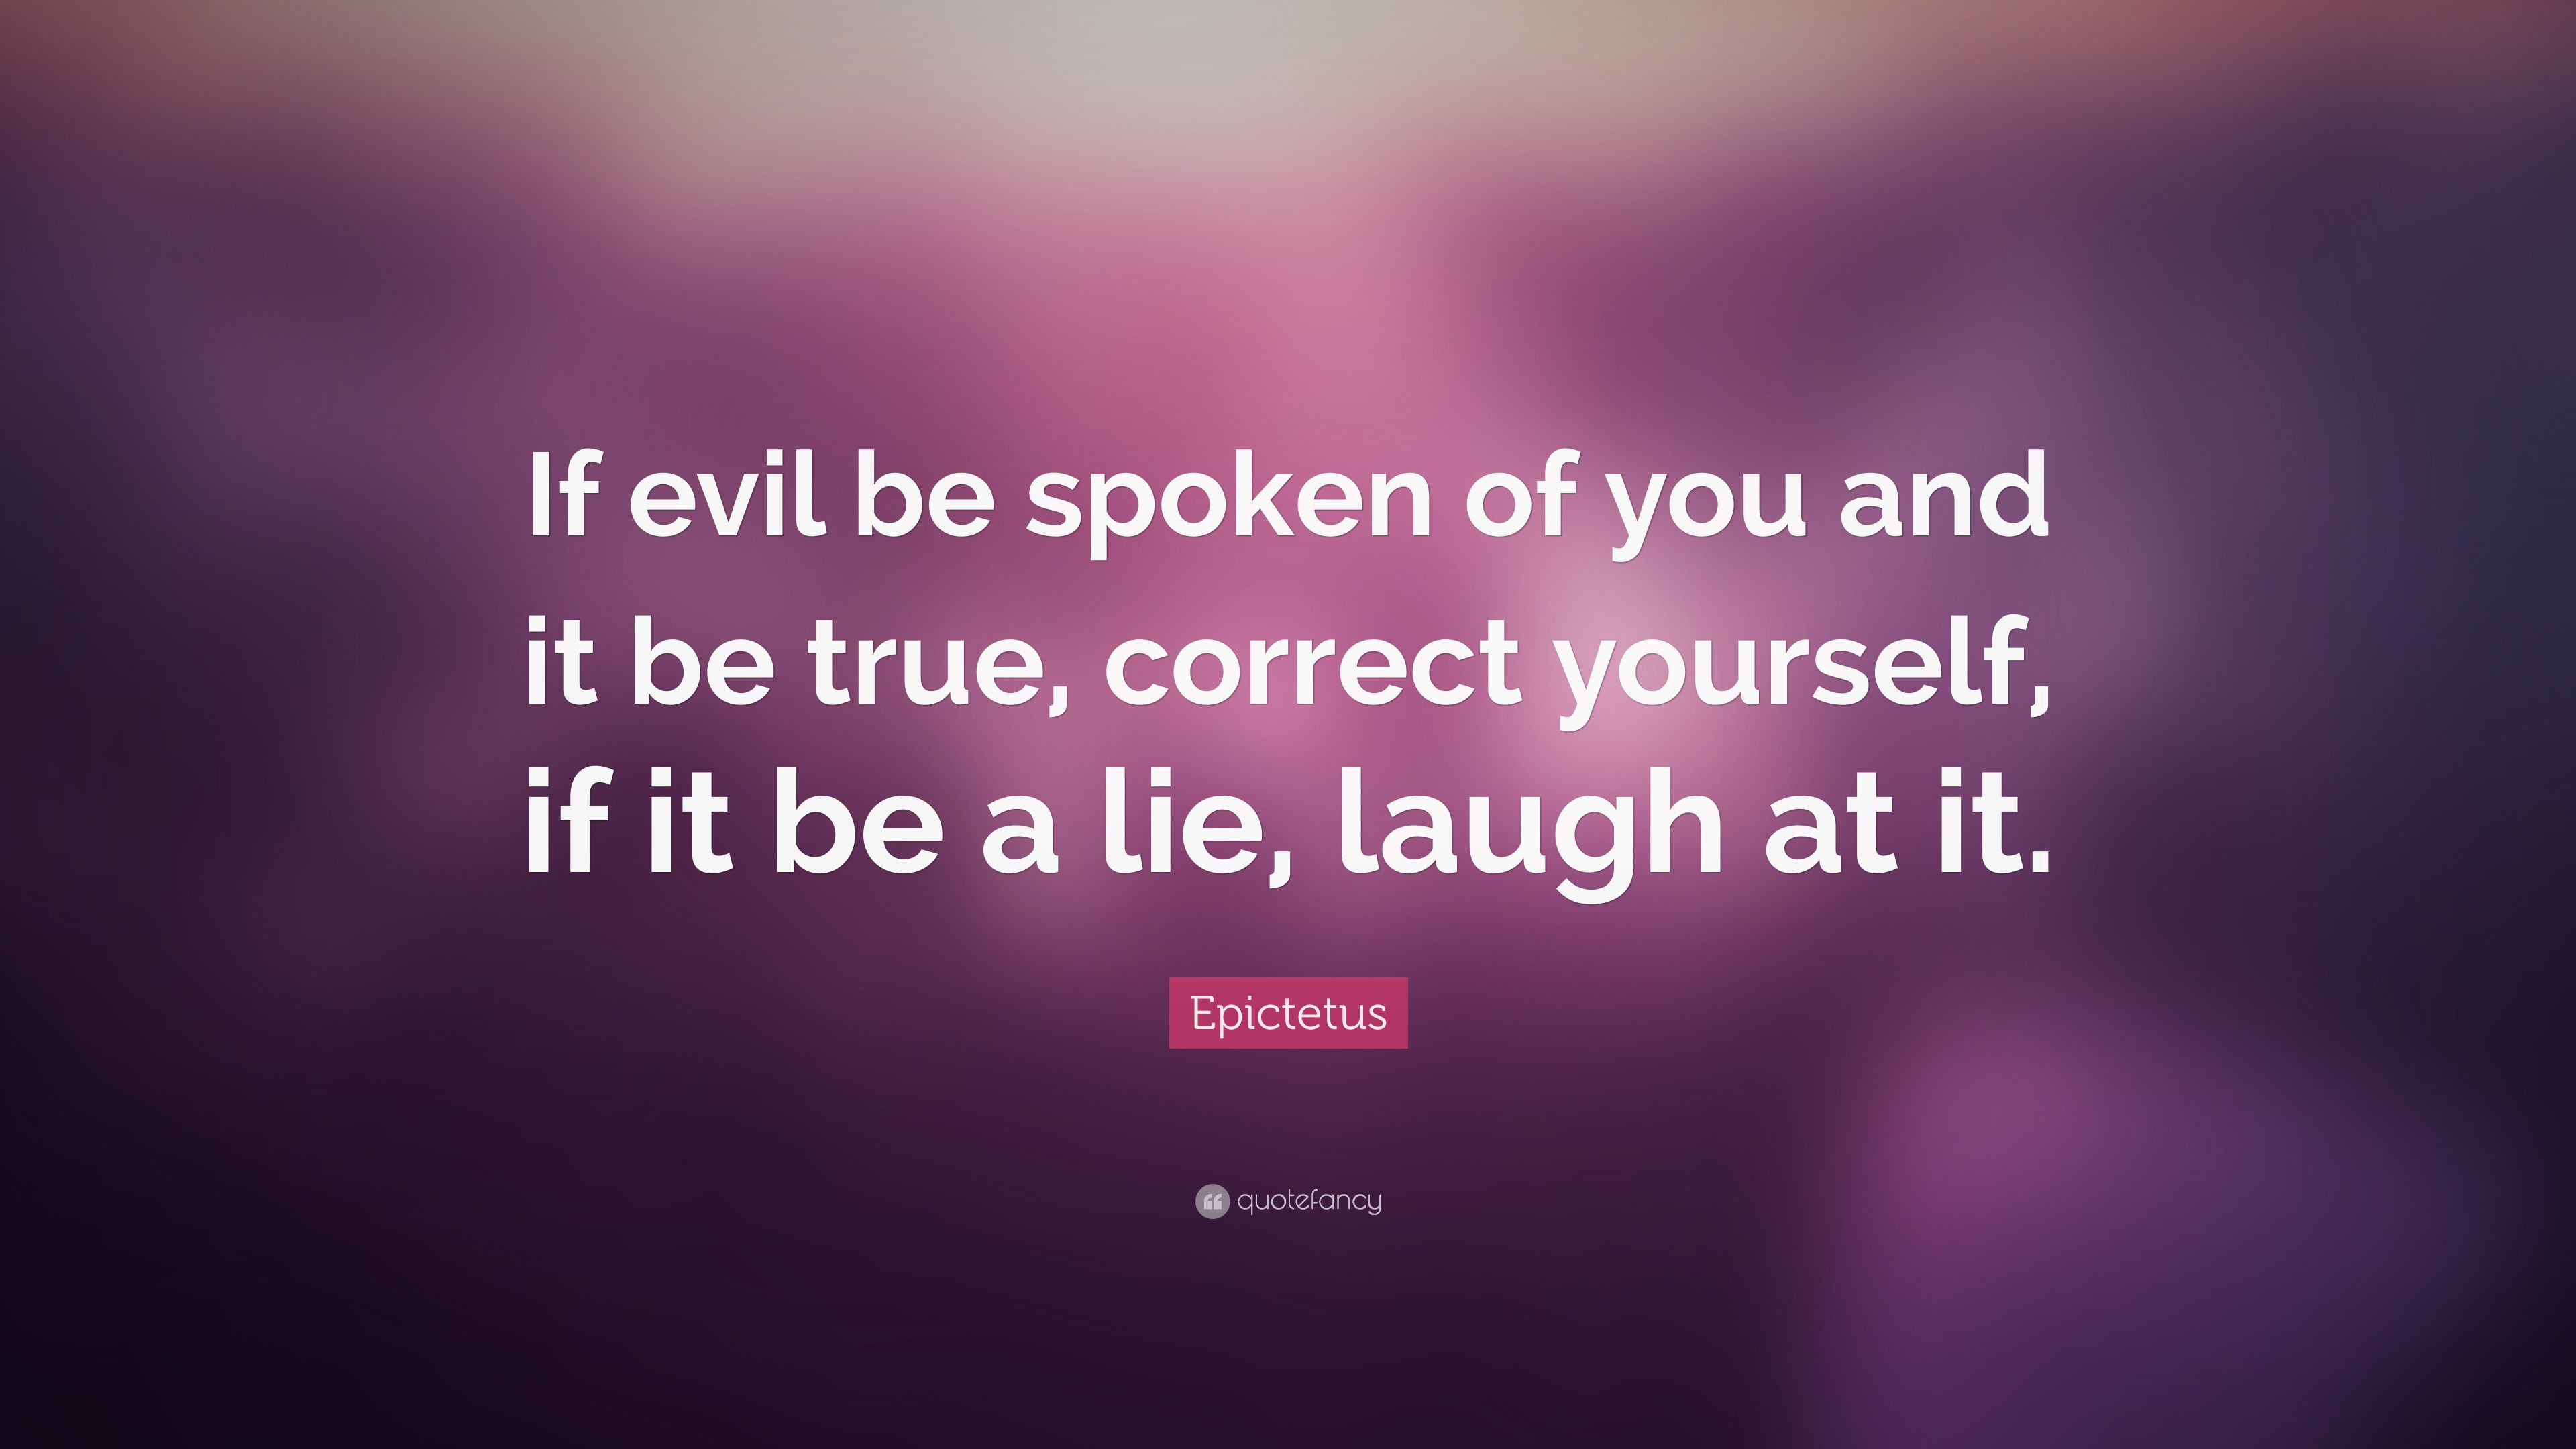 Epictetus Quote: “If evil be spoken of you and it be true, correct